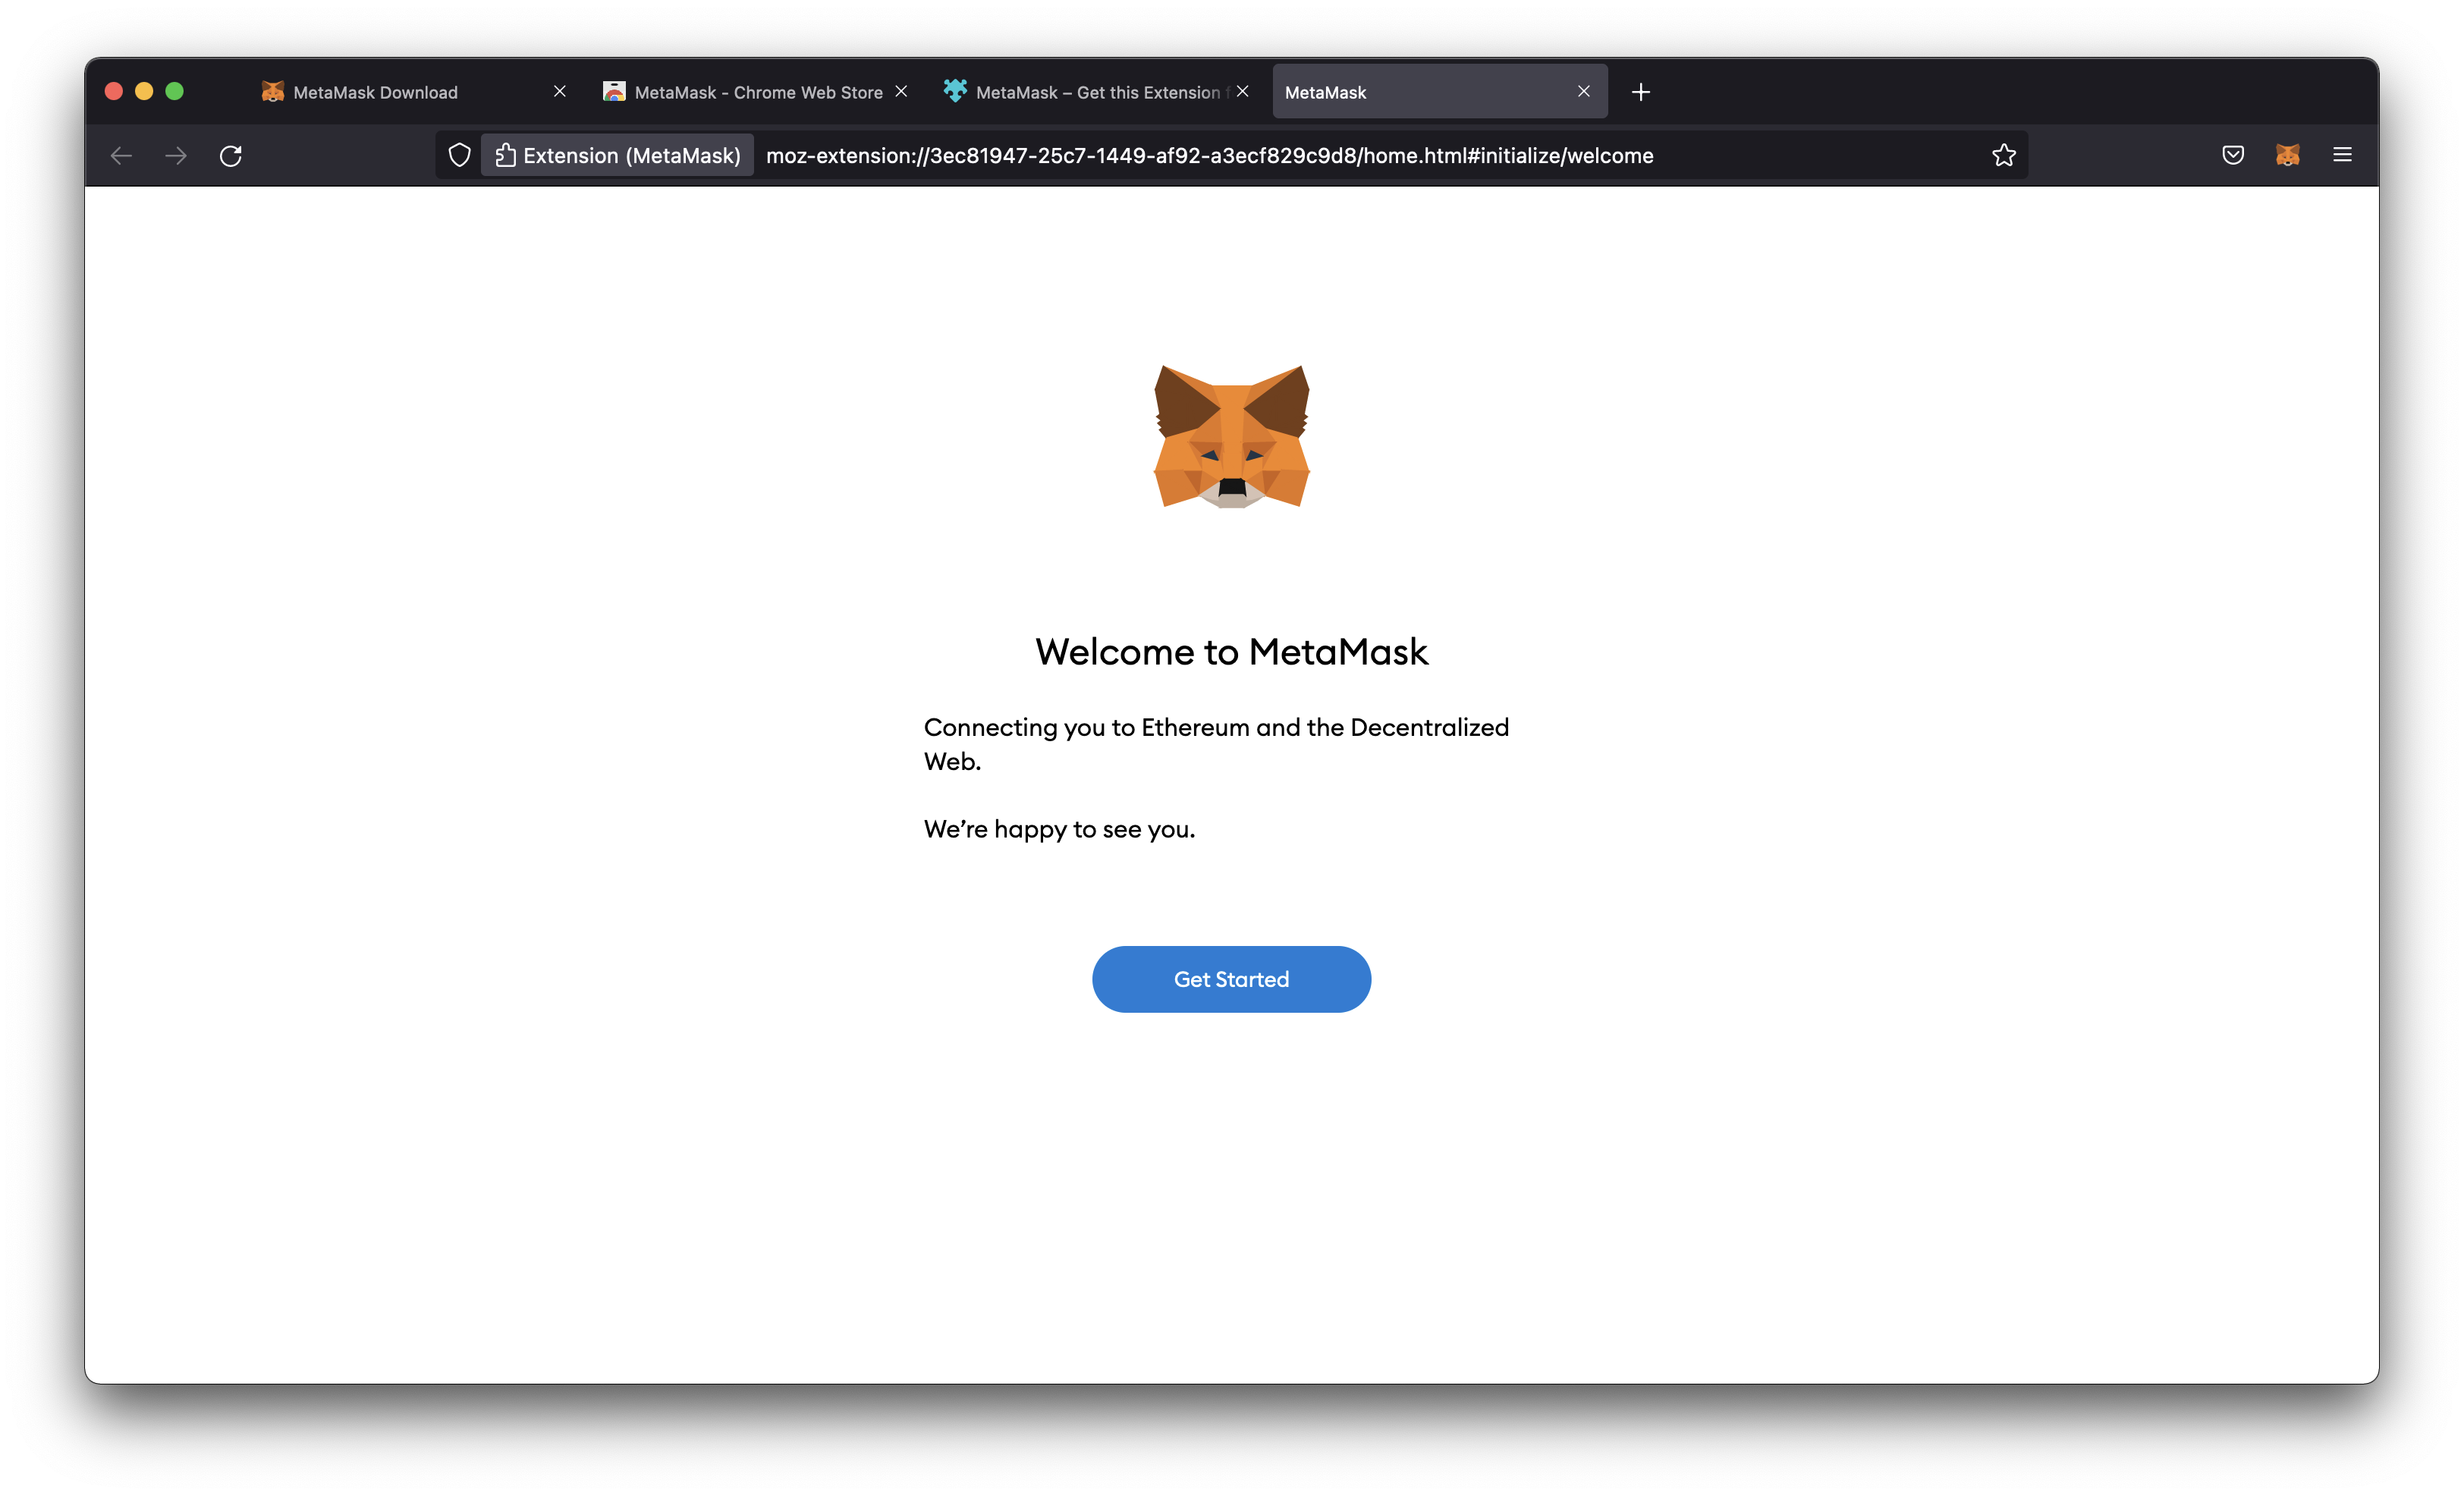 Welcome to MetaMask